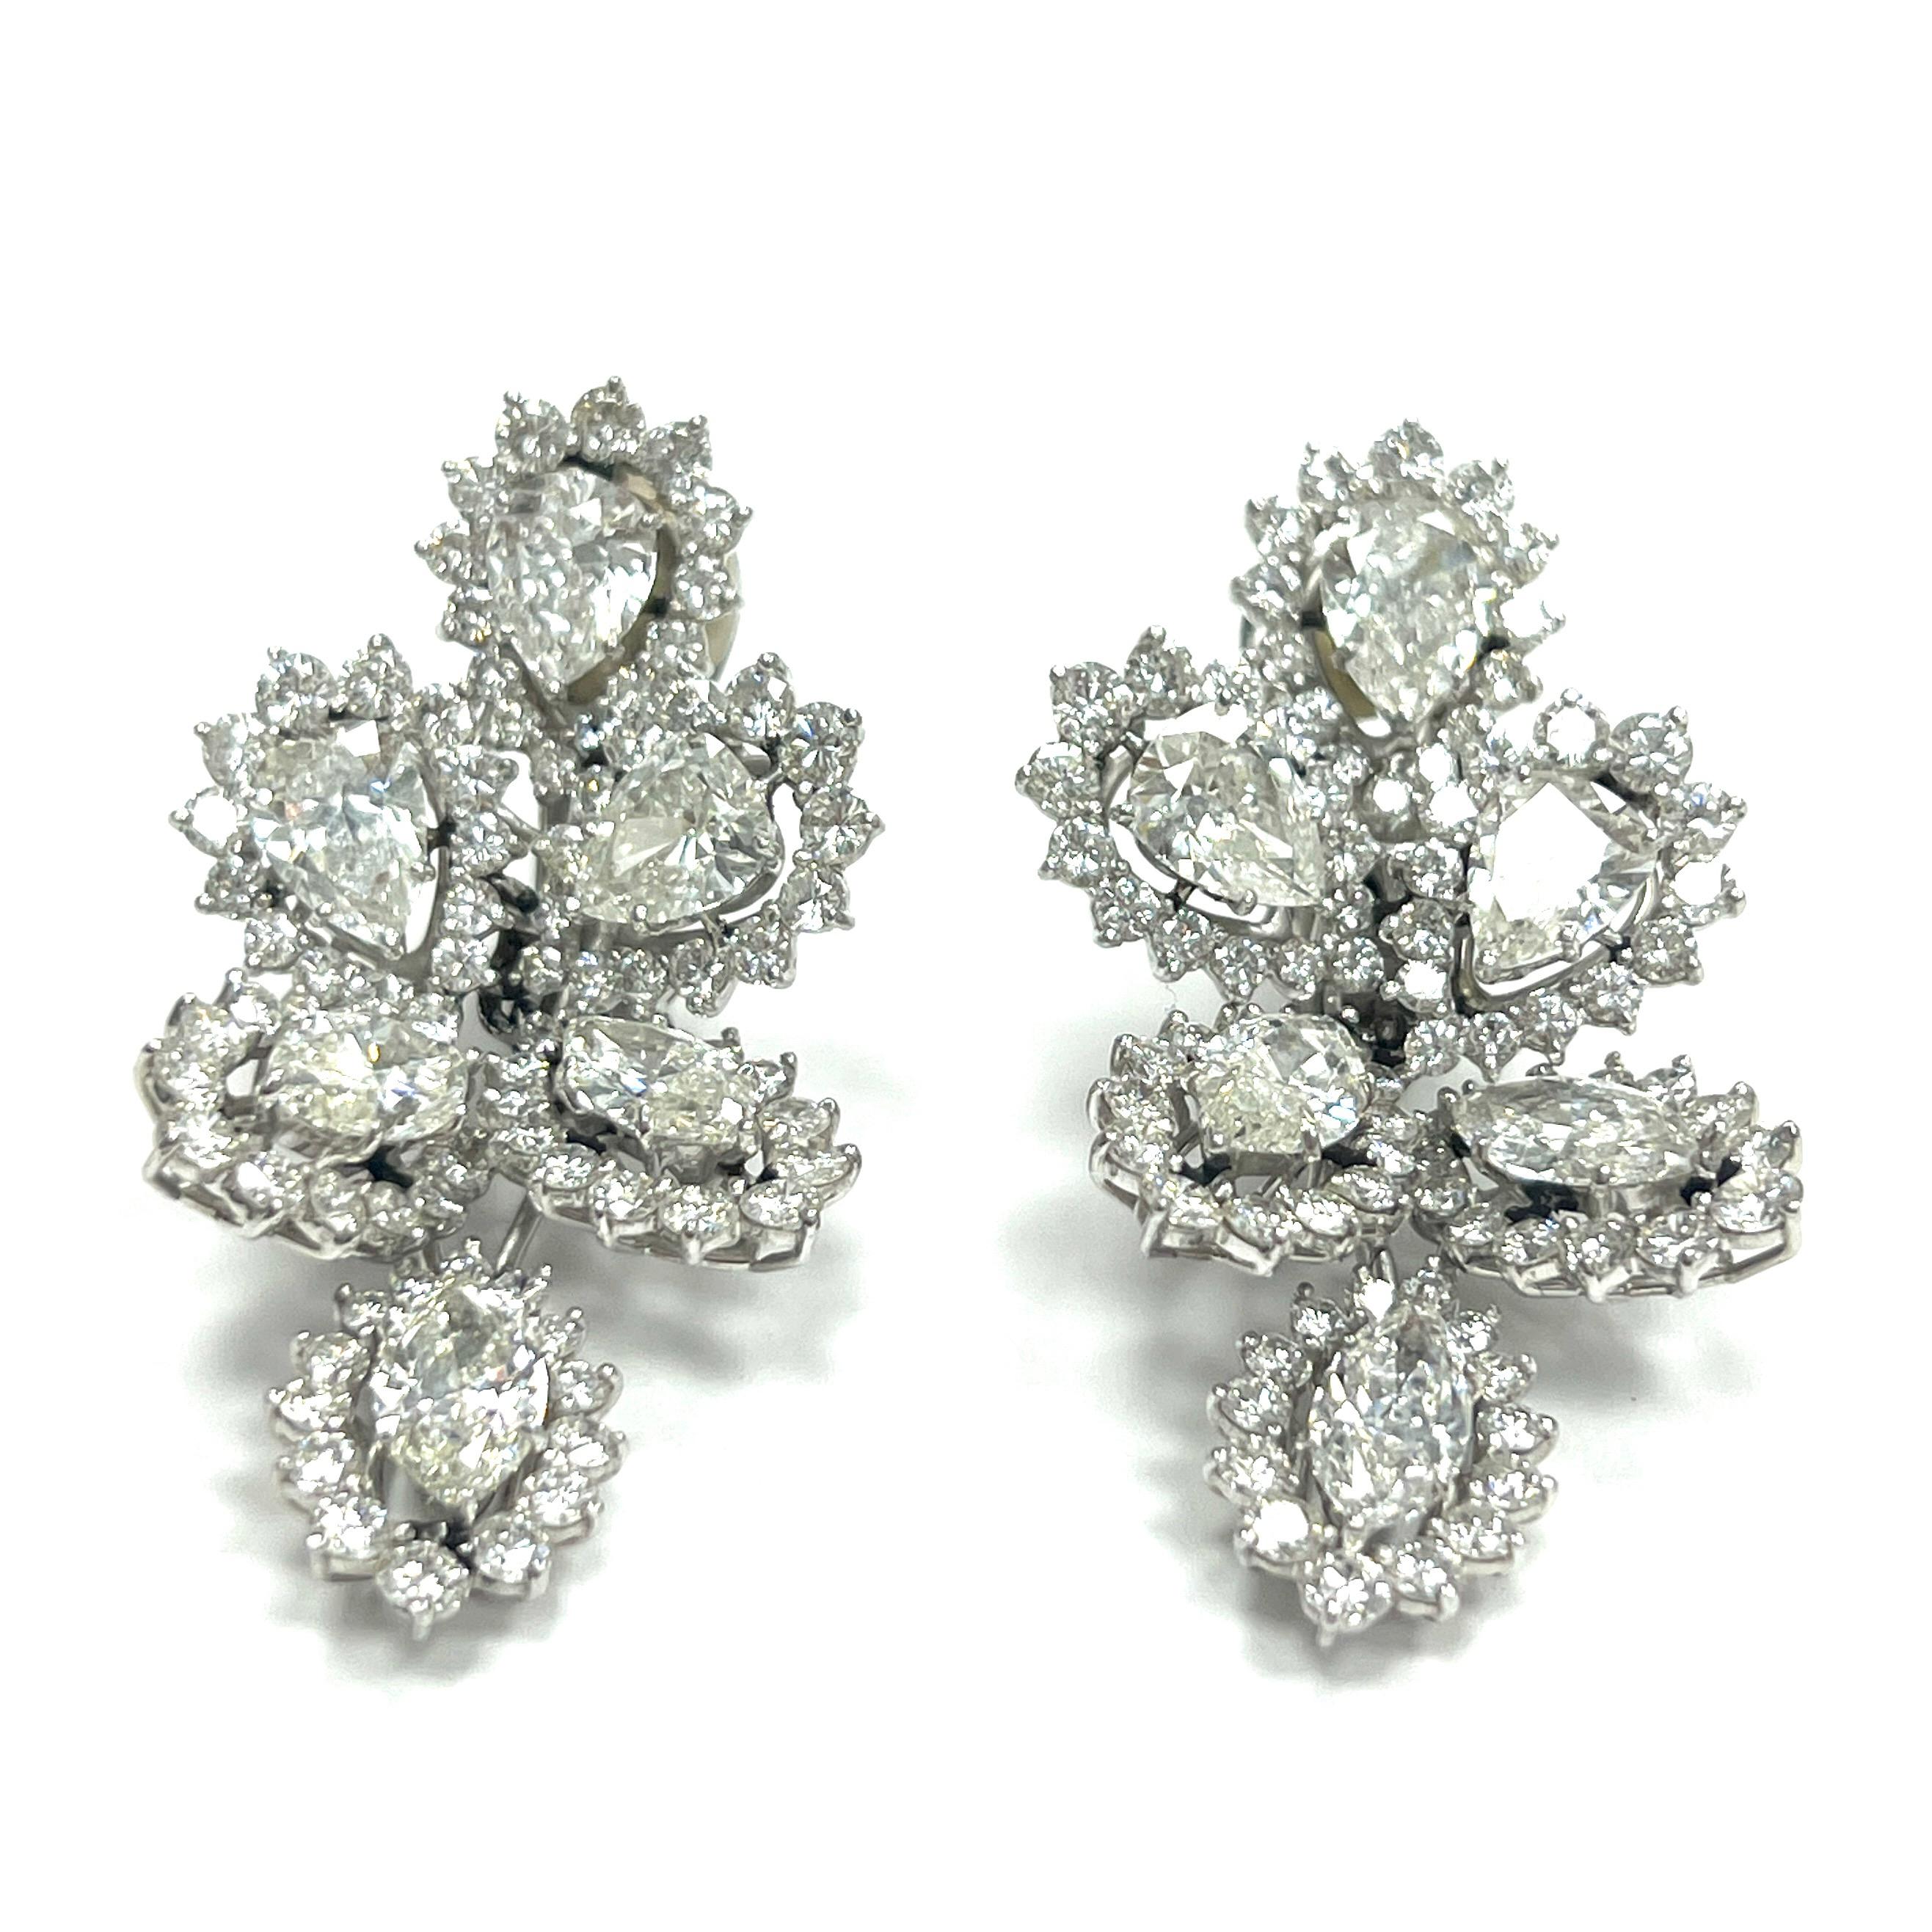 Beautiful Diamond Platinum Dangling Ear Clips

Twelve pear-shaped diamonds and one hundred sixty-eight round-cut diamonds of approximately 25 carats total; set on platinum

Size: width 2.2 cm, length 4.6 cm
Total weight: 28.2 grams